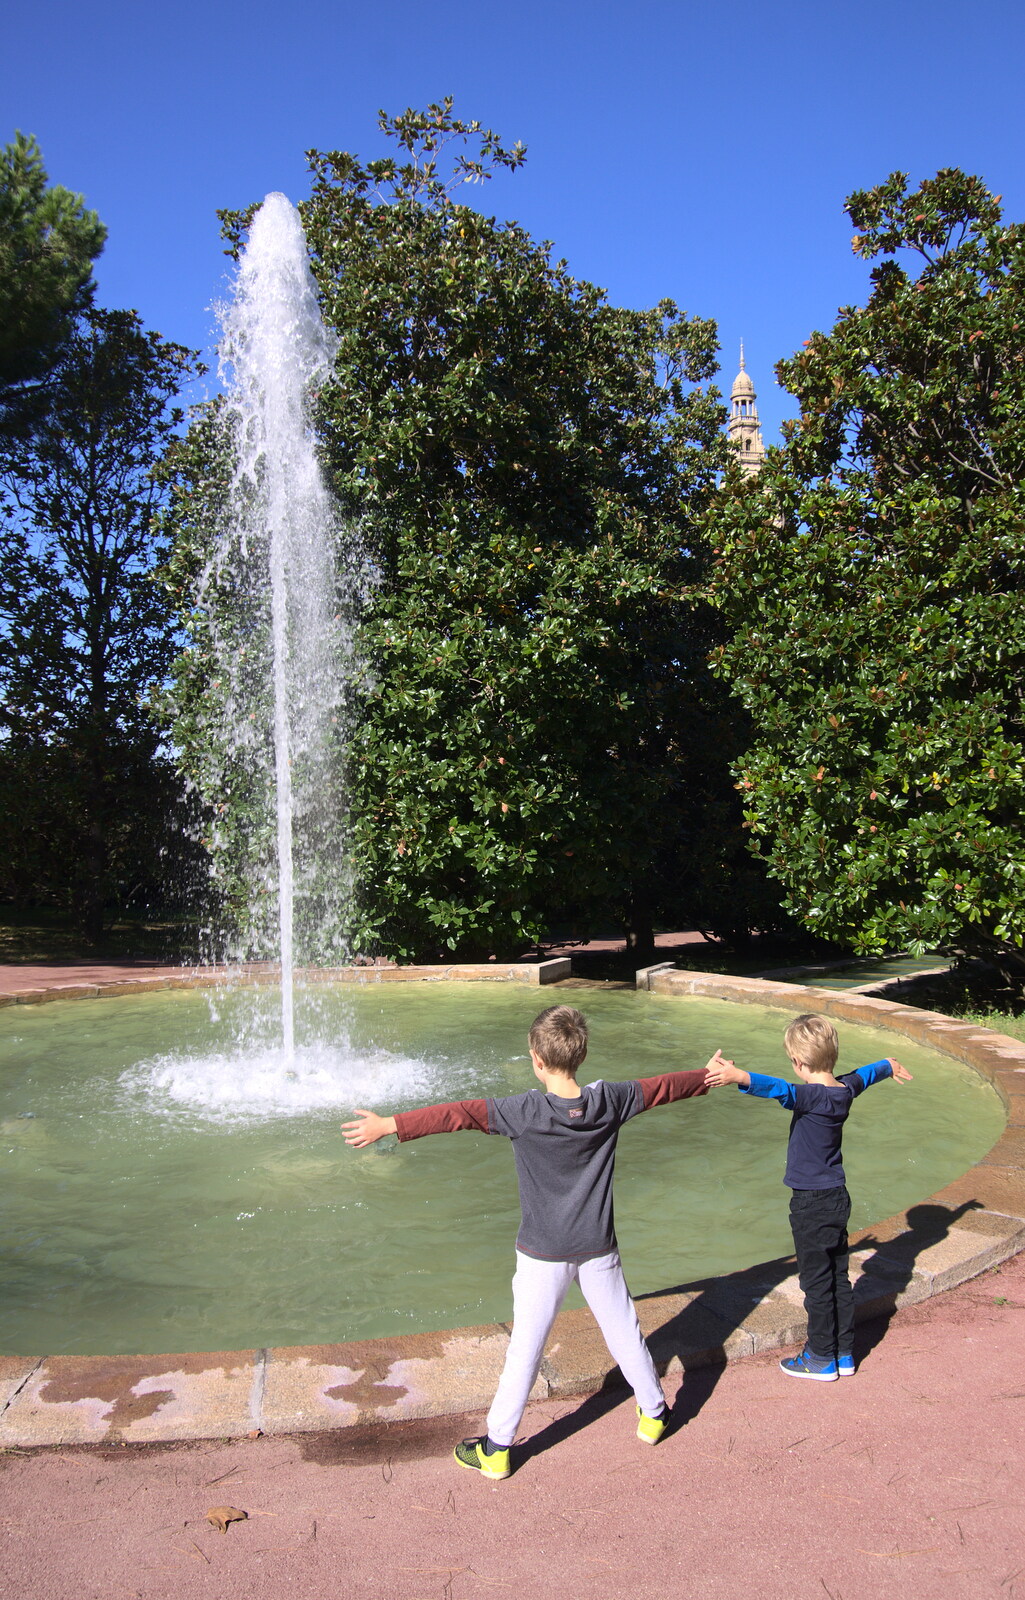 The boys find a massive fountain from Barcelona and Parc Montjuïc, Catalonia, Spain - 21st October 2017